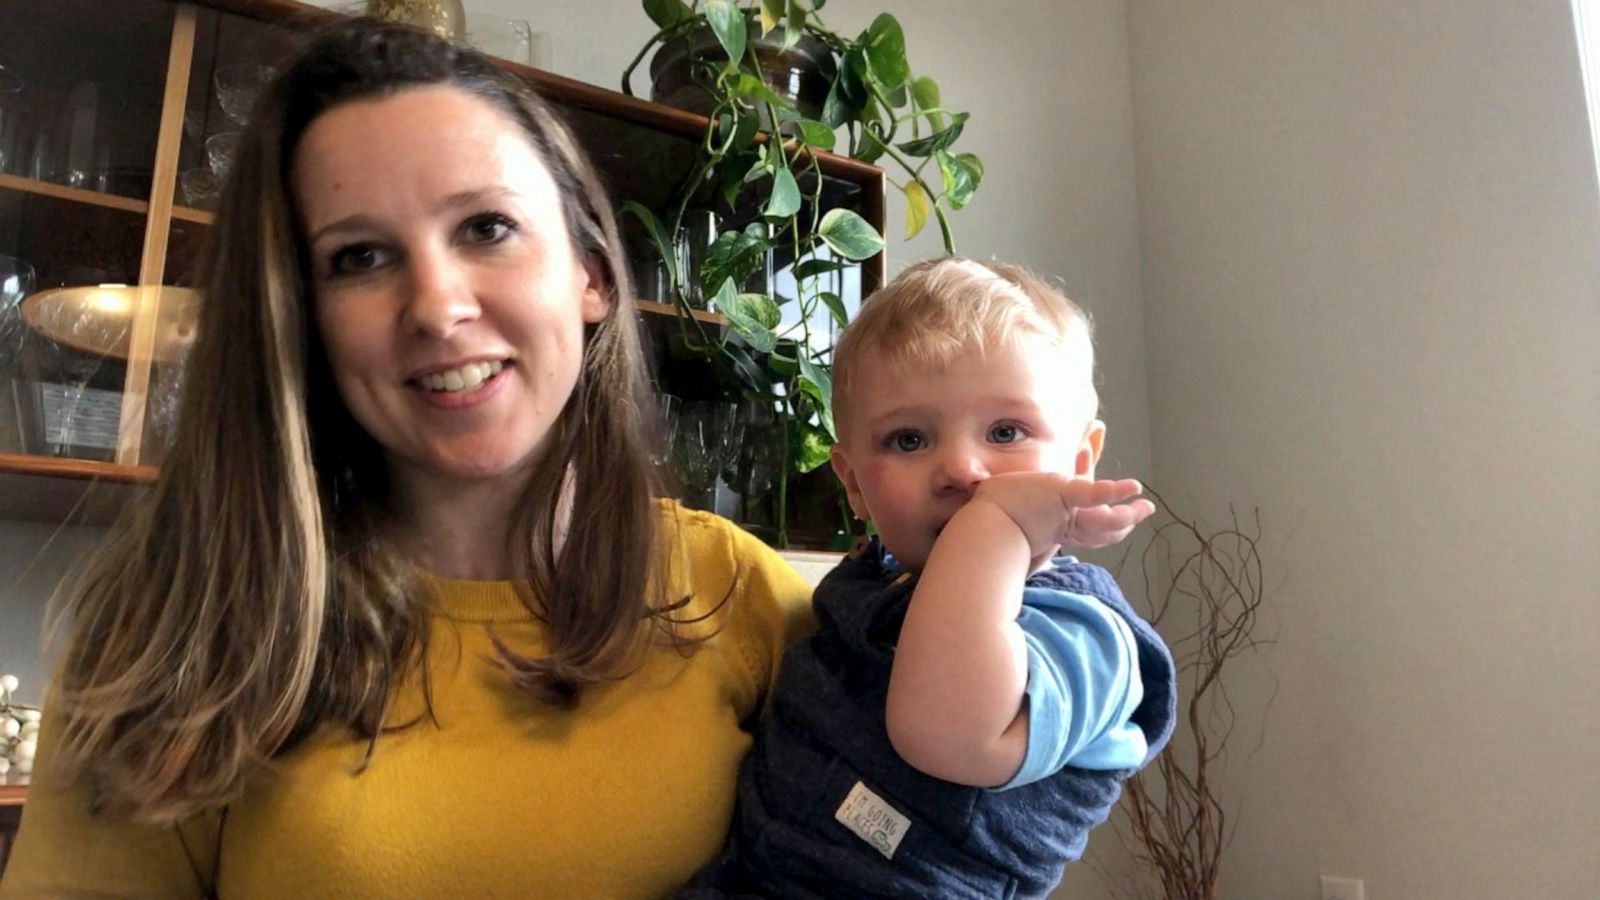 Mother posts video of toddler enamored with violinist playing music - ABC  News